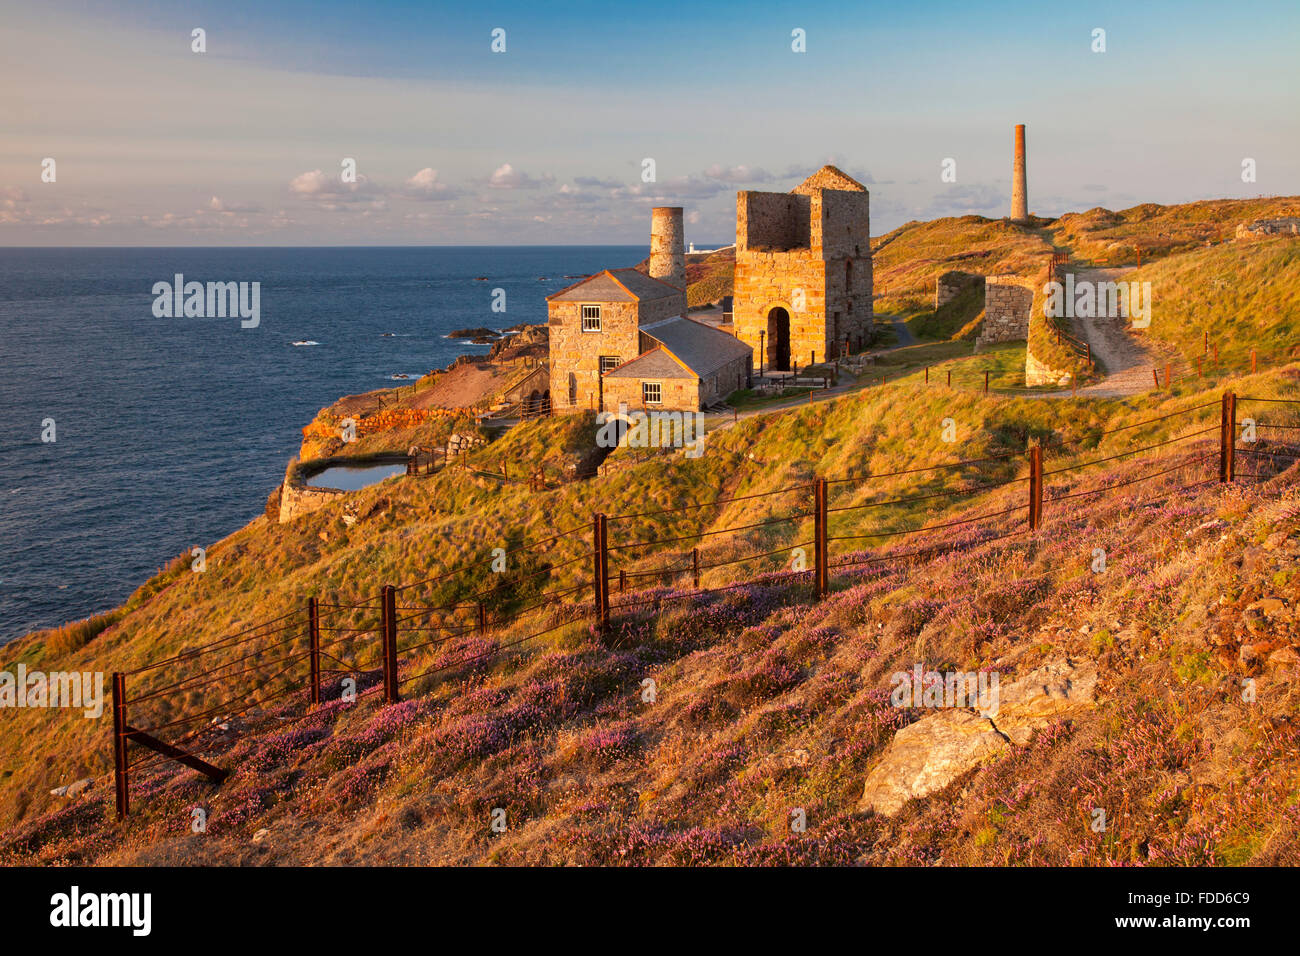 The engine houses at Levant, near St just in West Cornwall. Stock Photo